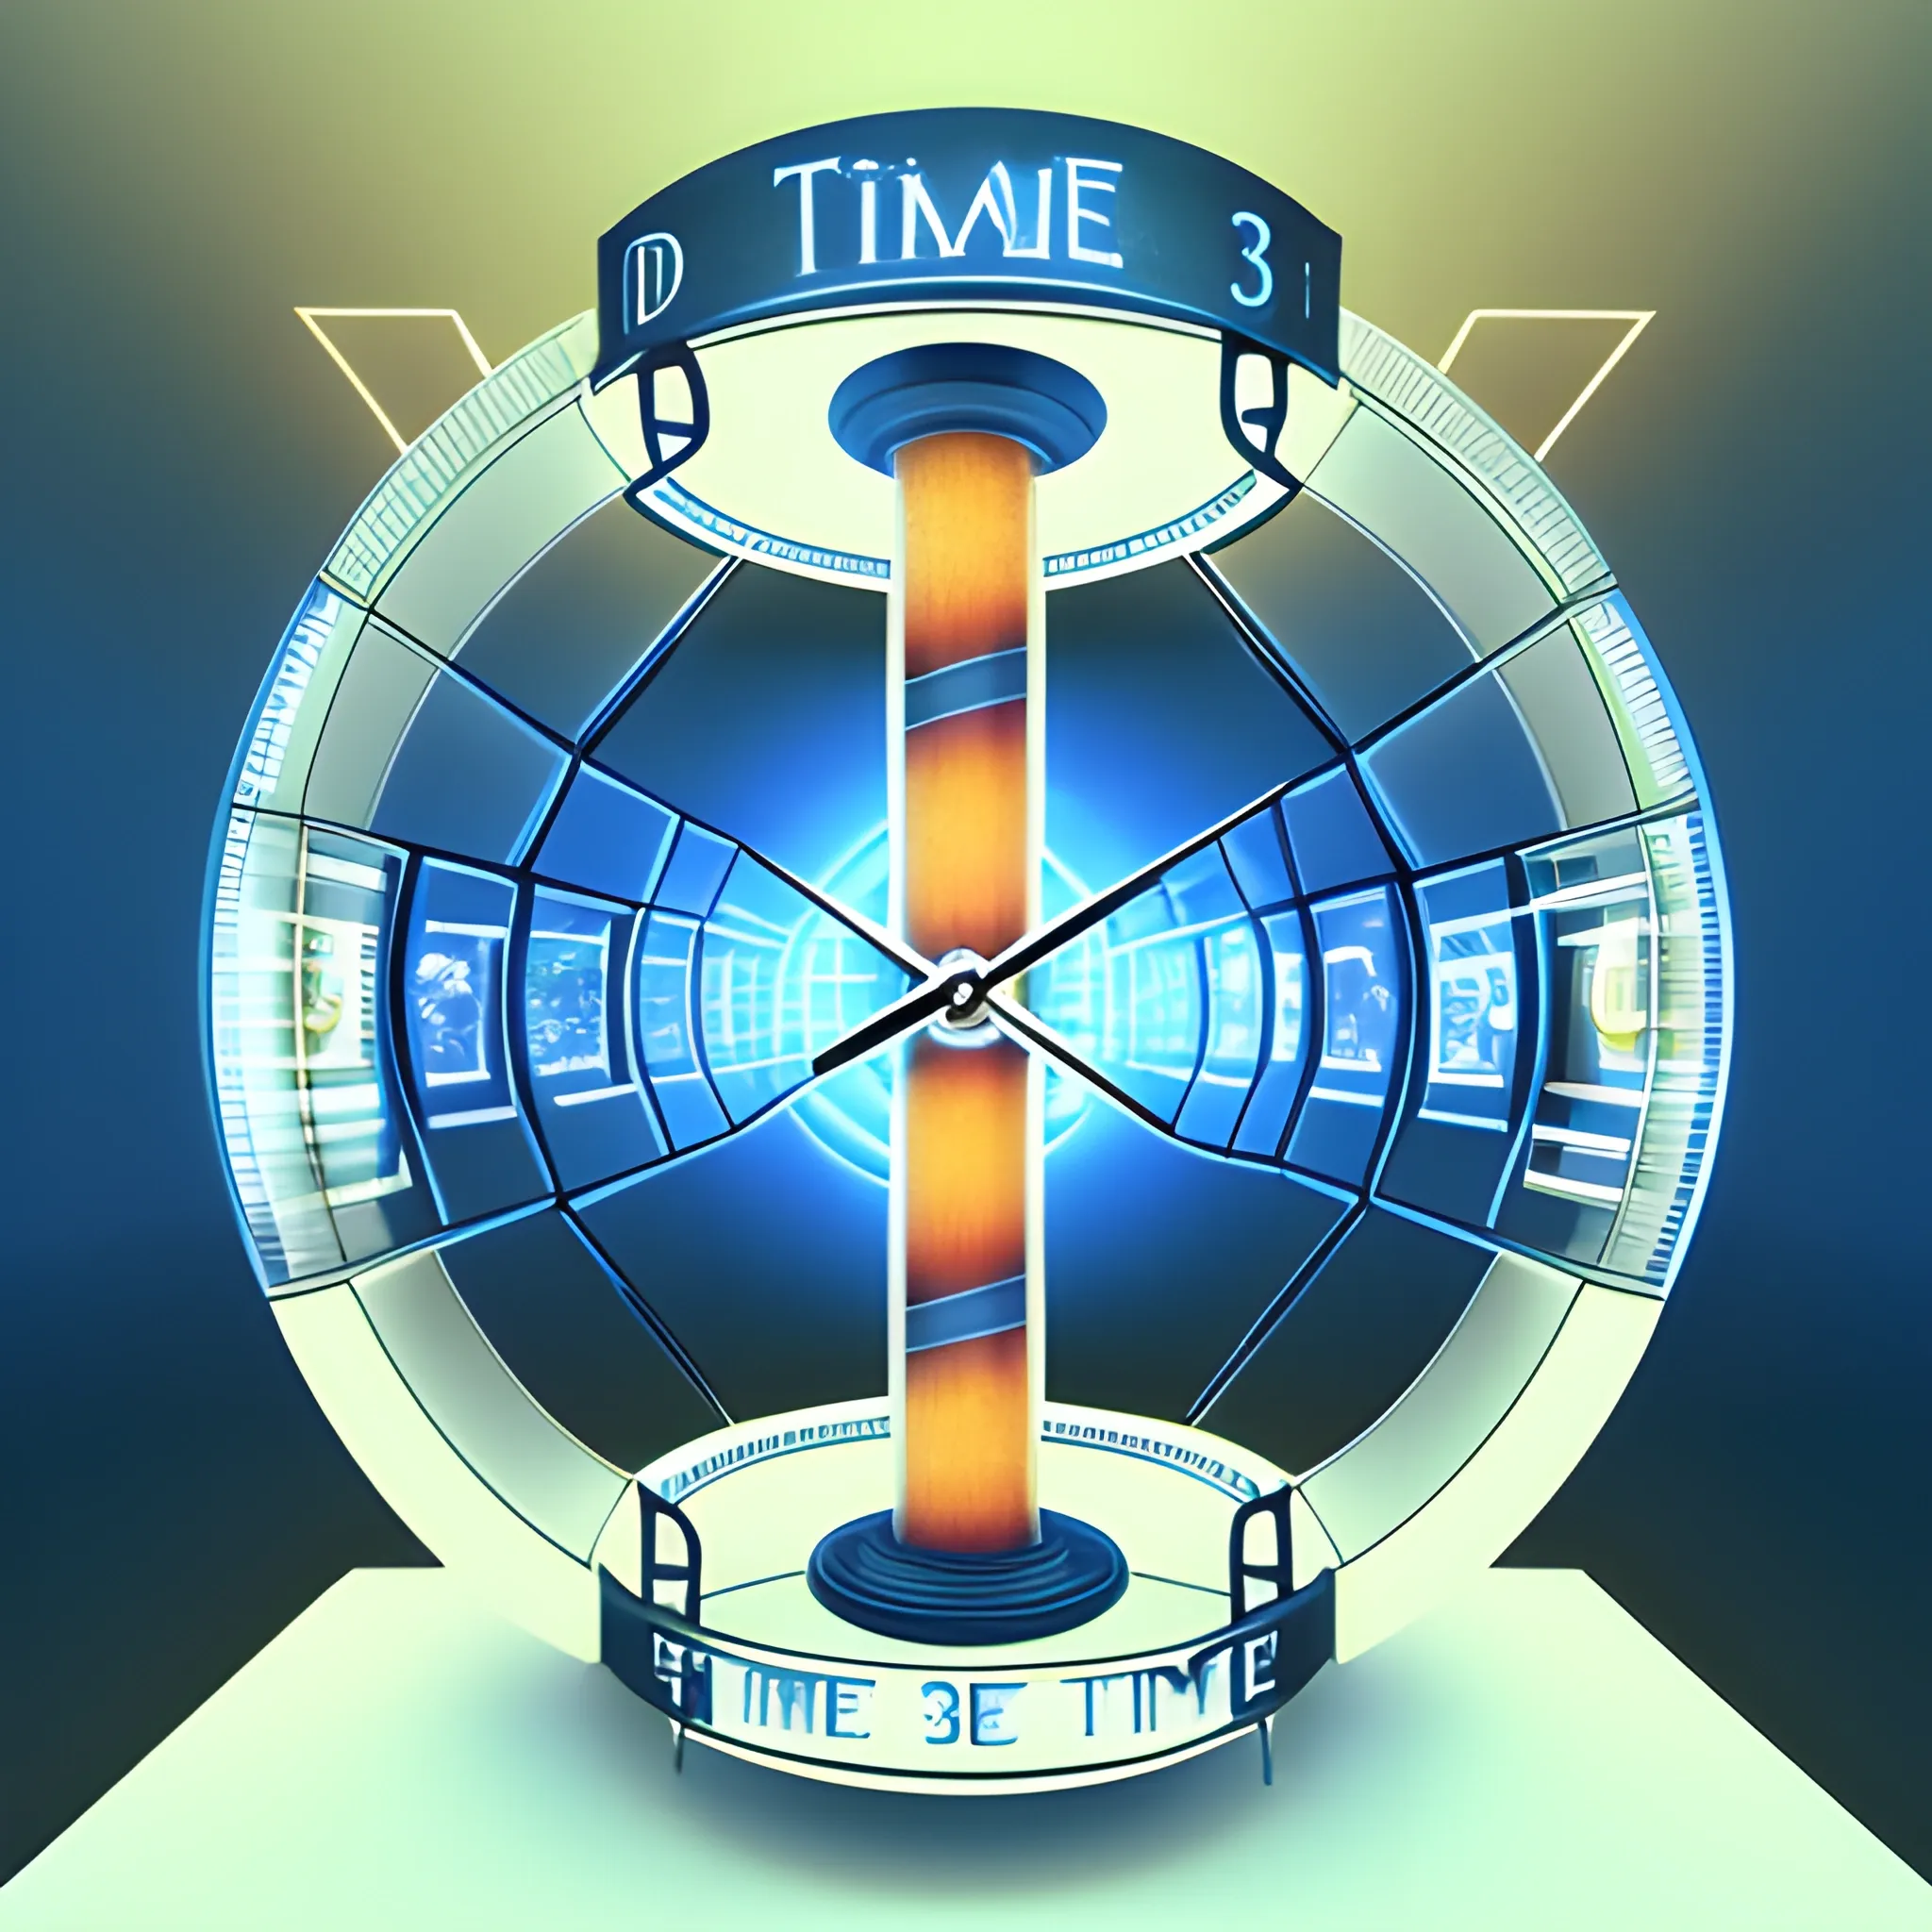 Time machine in operation,Time funnel, 3D,dream